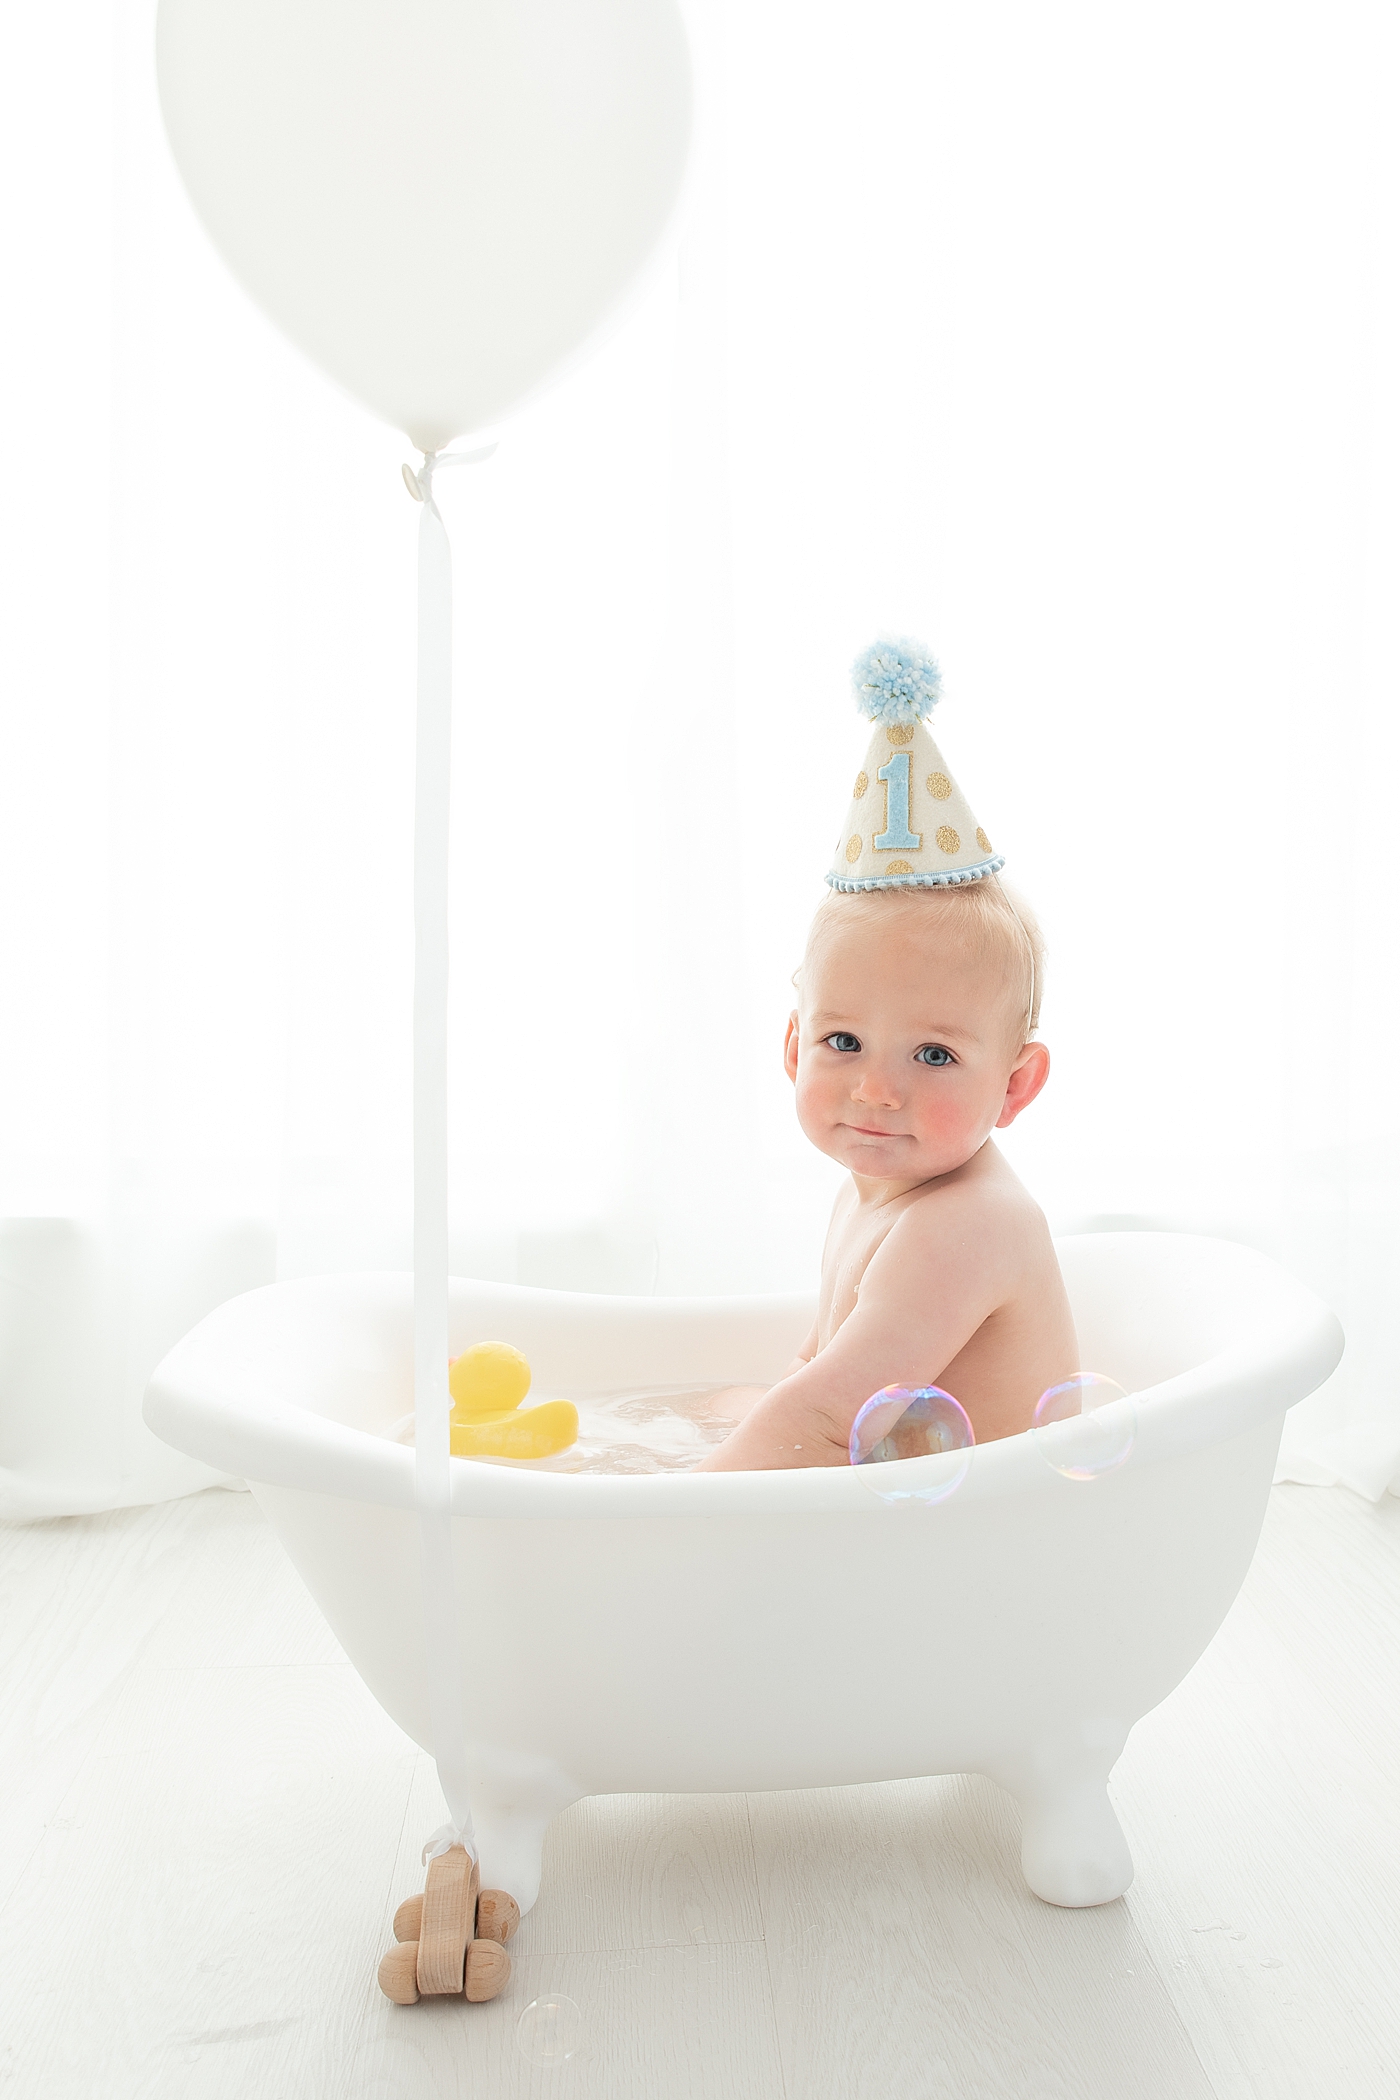 Bubble bath at the end of a cake smash session for one year old. Photo by Rachel Brookes Photography.